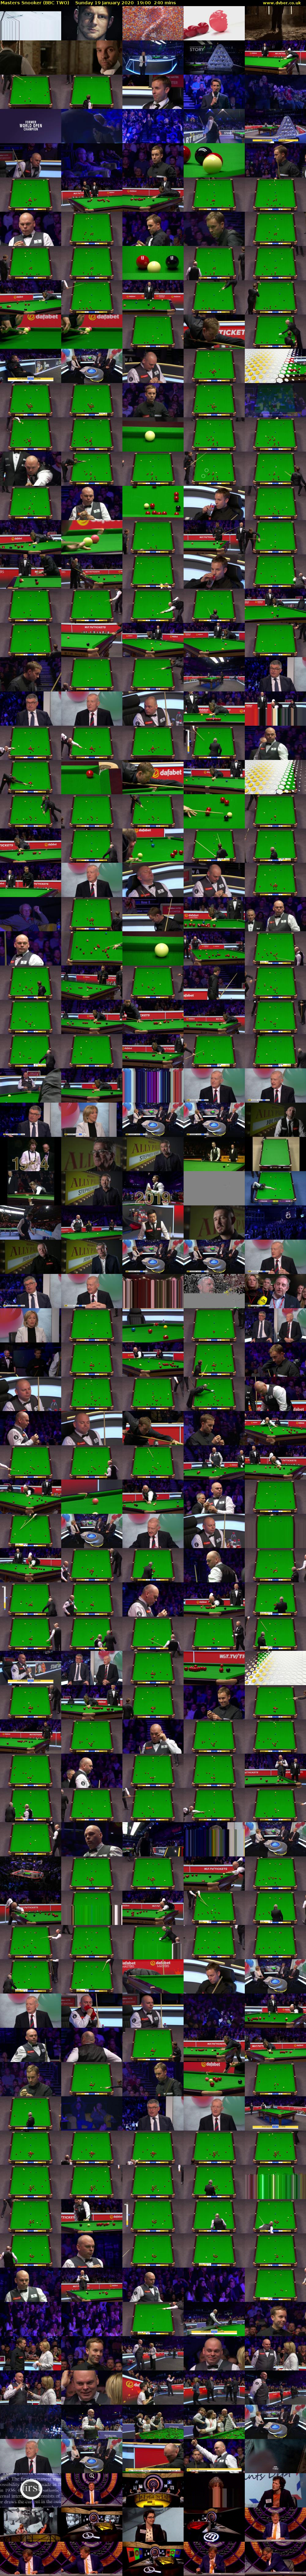 Masters Snooker (BBC TWO) Sunday 19 January 2020 19:00 - 23:00